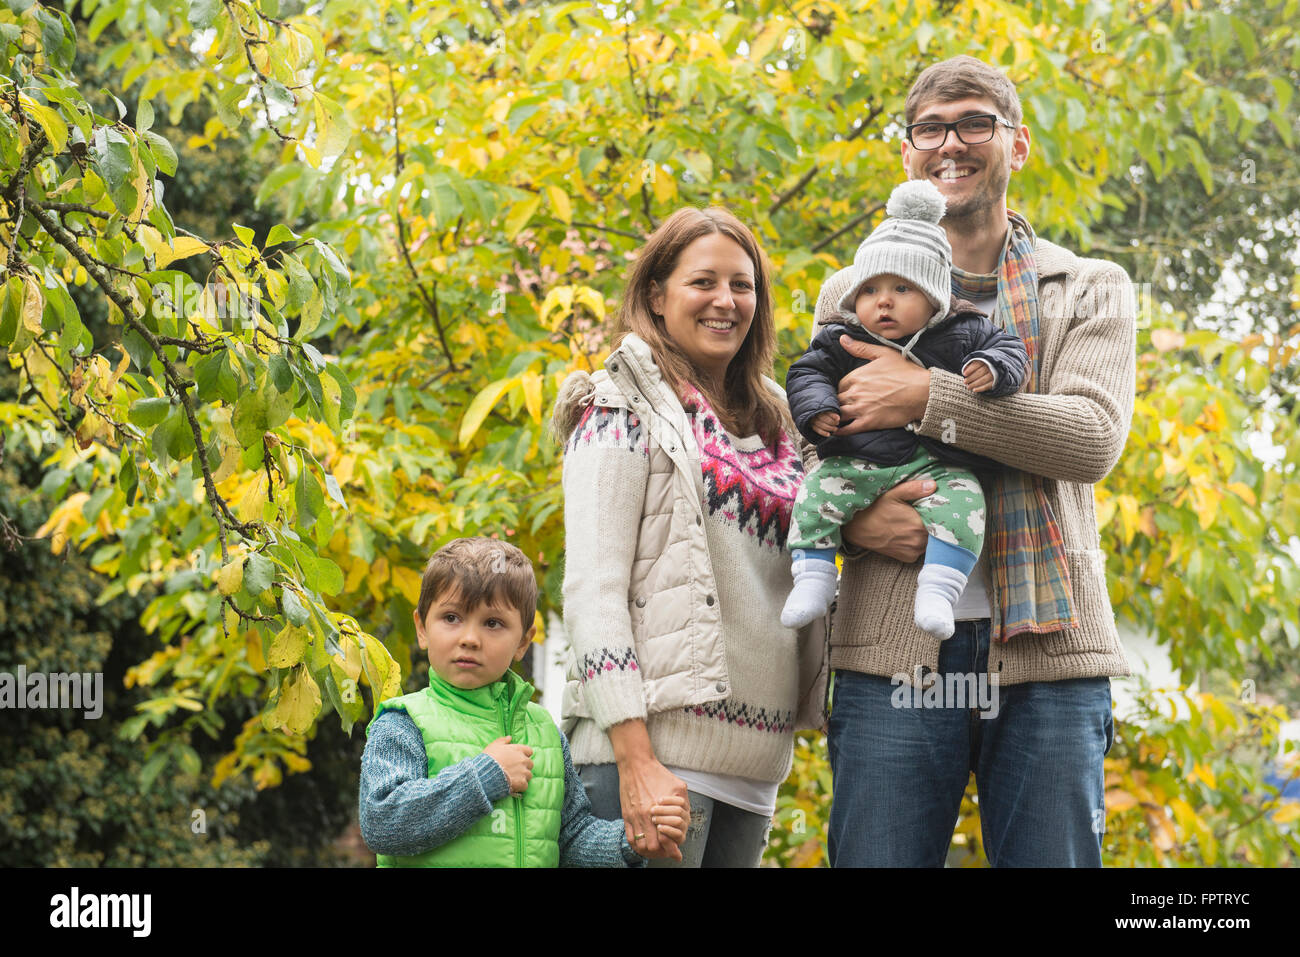 Portrait of a nuclear family standing in an organic farm and smiling, Bavaria, Germany Stock Photo